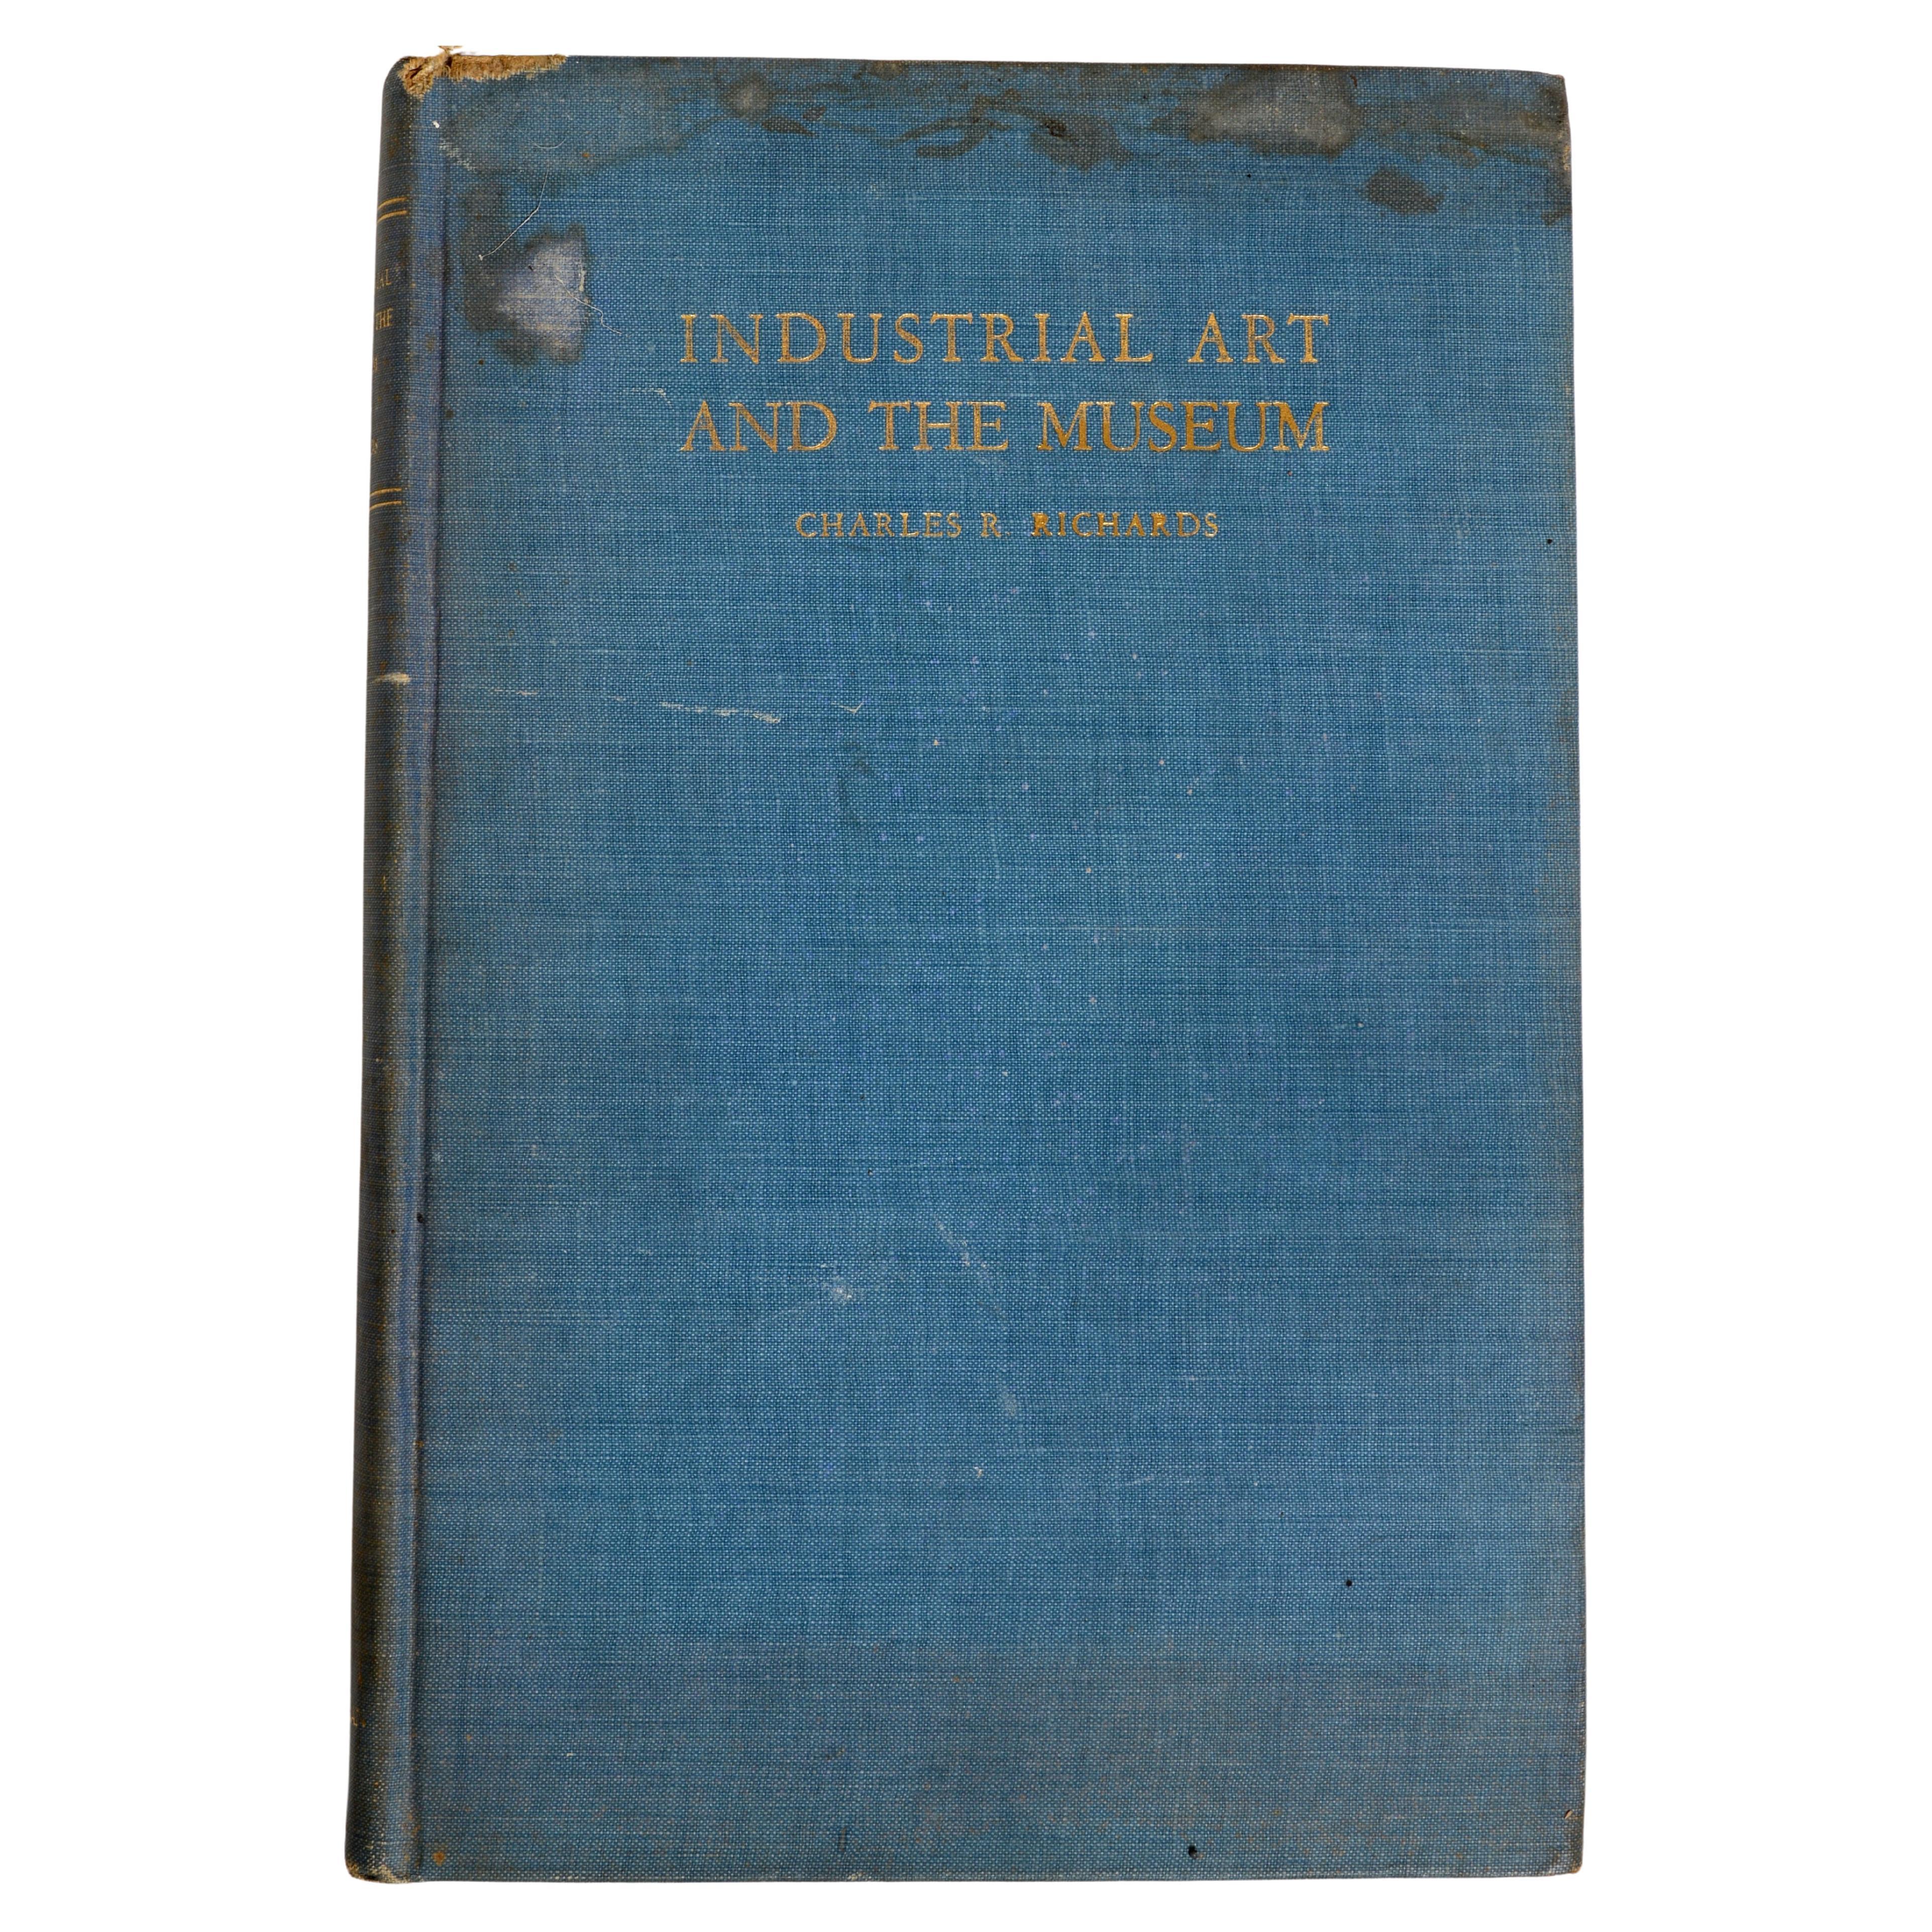 Industrial Art and the Museum by Charles R. Richards, 1st Ed